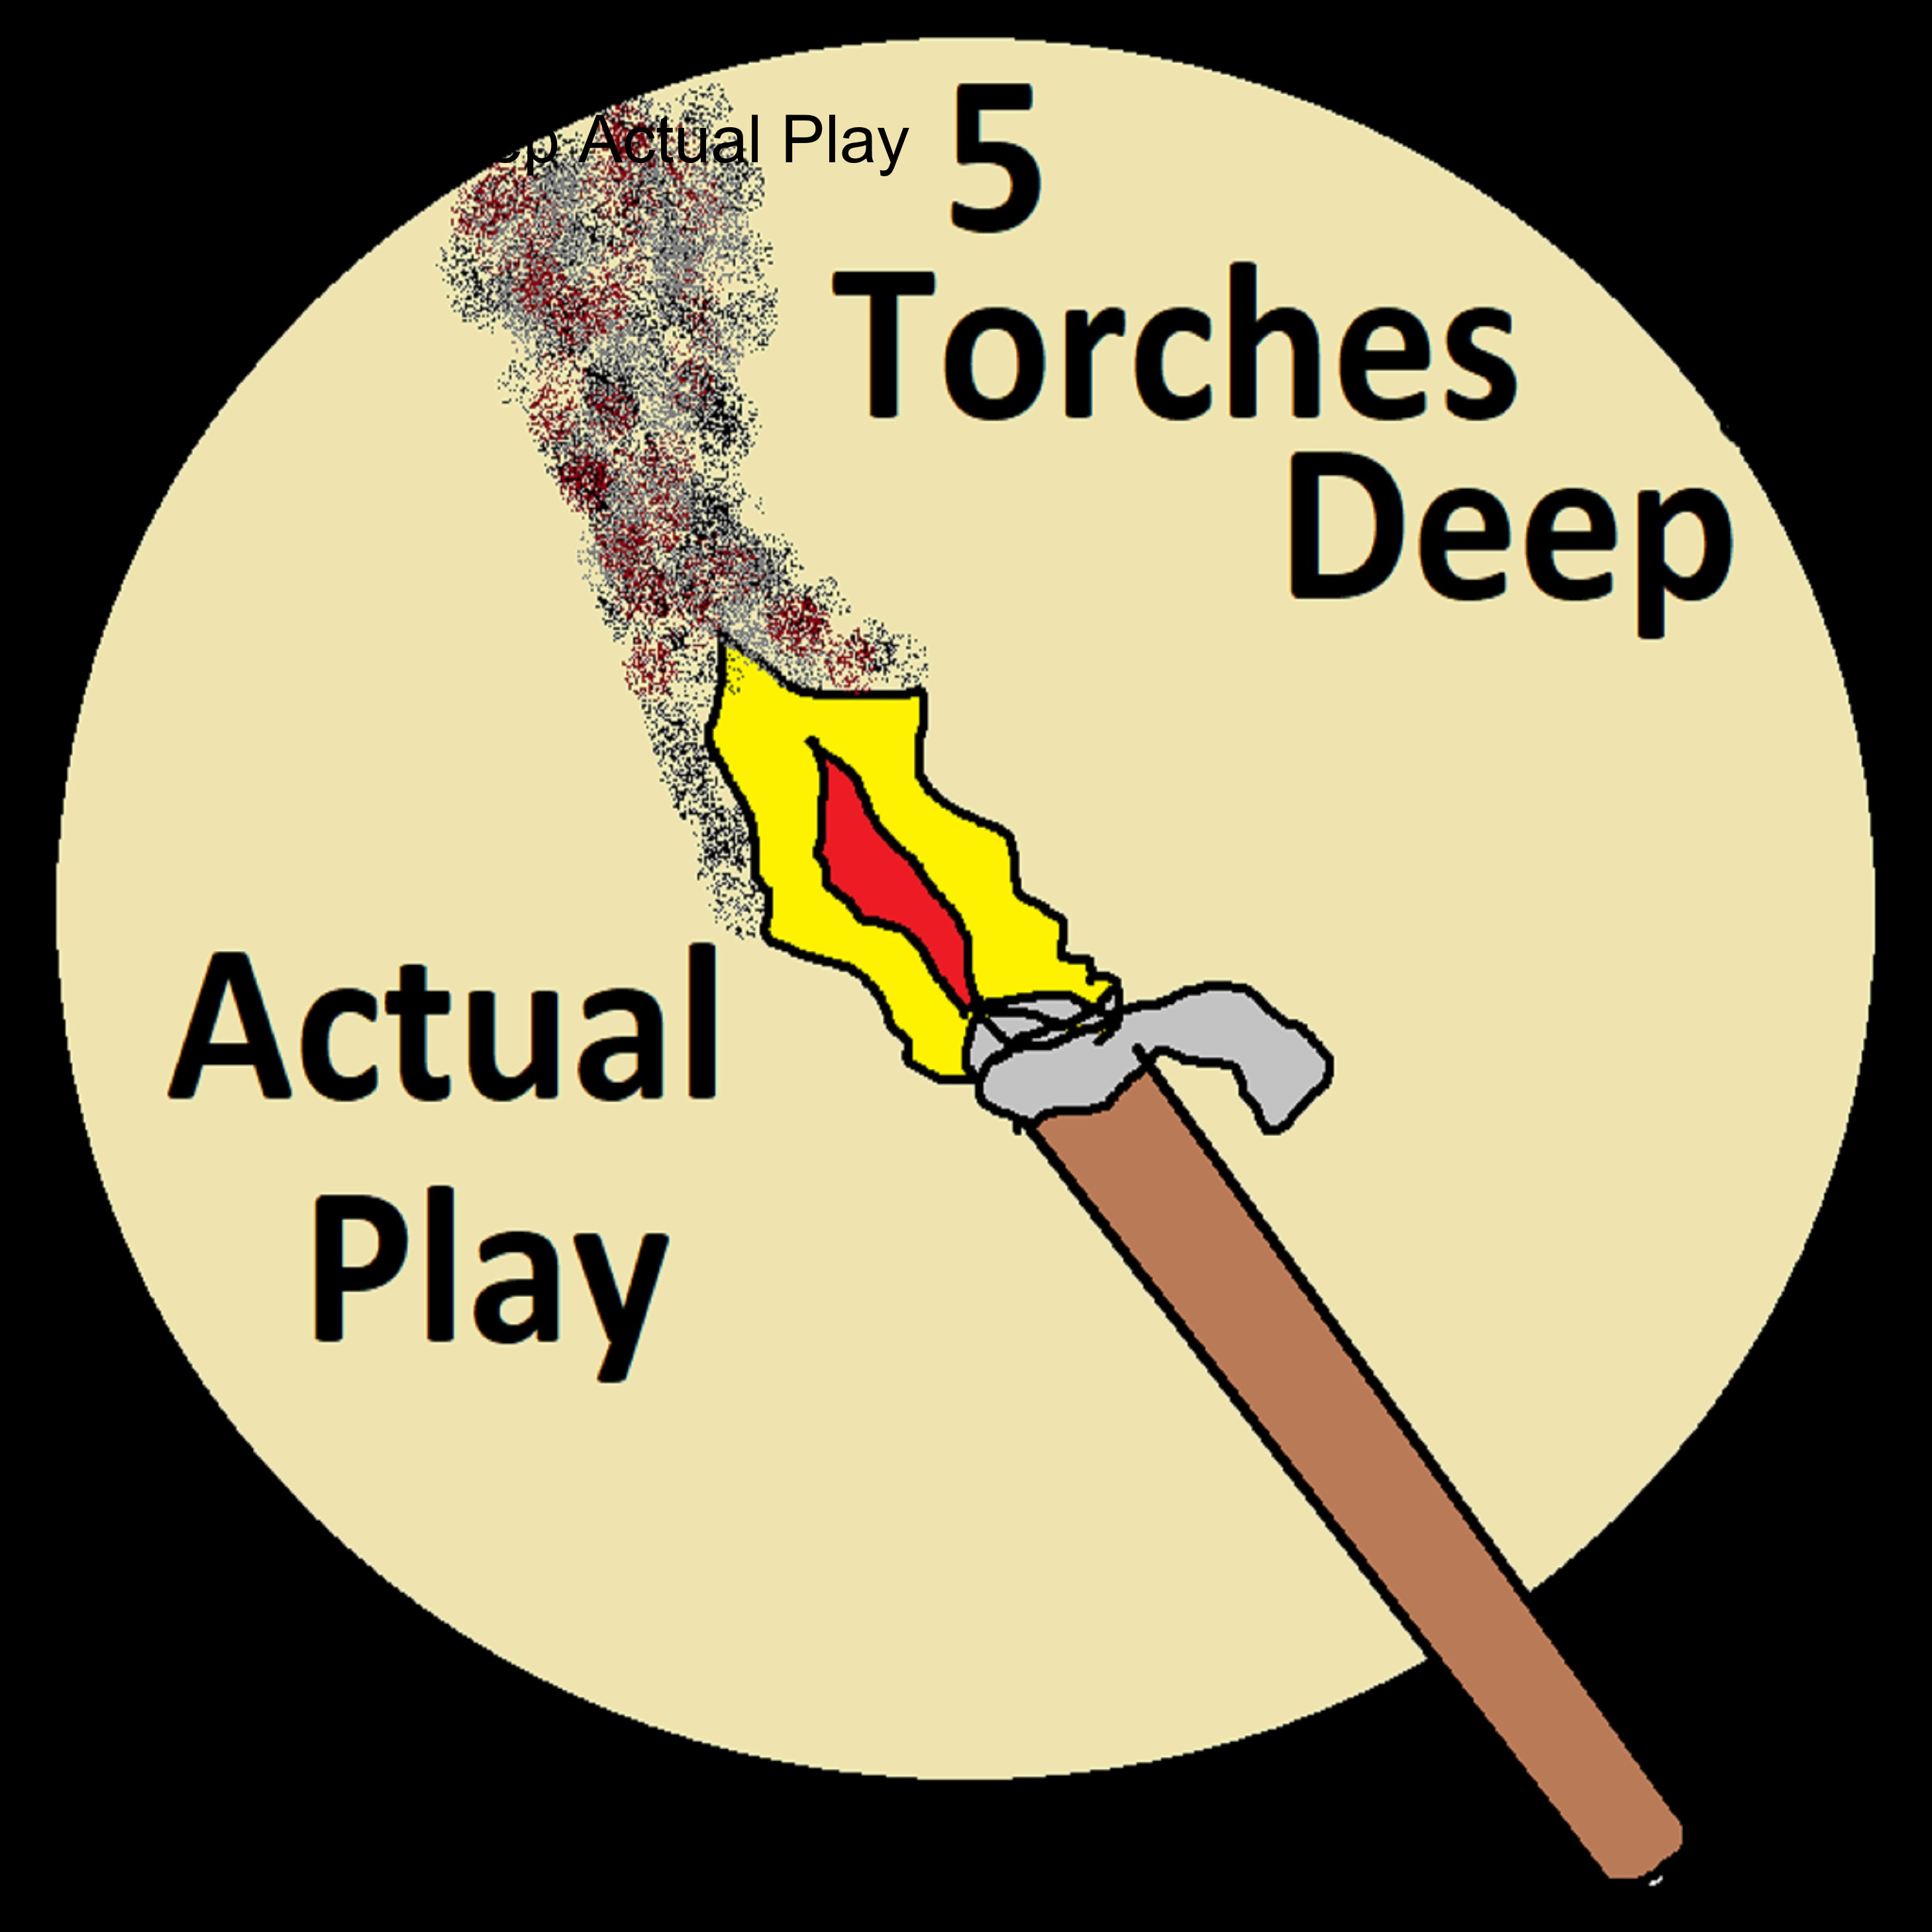 5 Torches Deep Actual Play